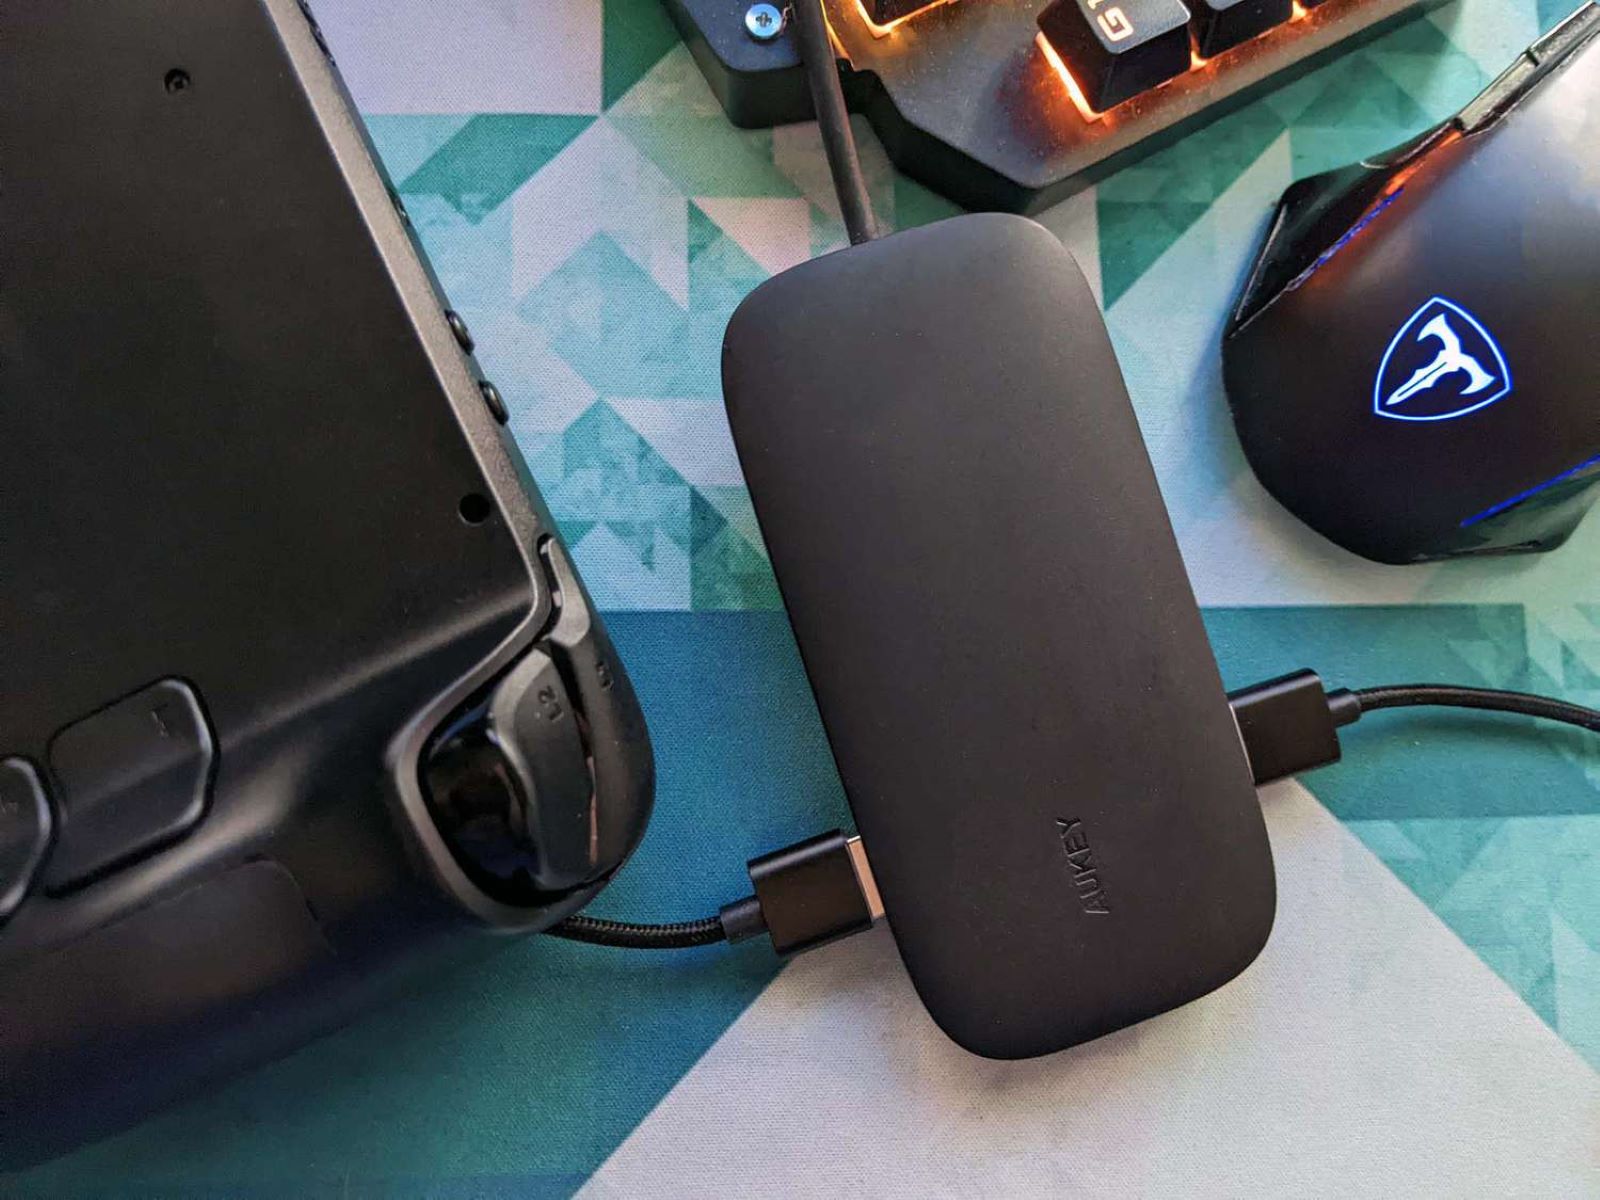 how-to-identify-which-usb-hub-my-mouse-is-connected-to